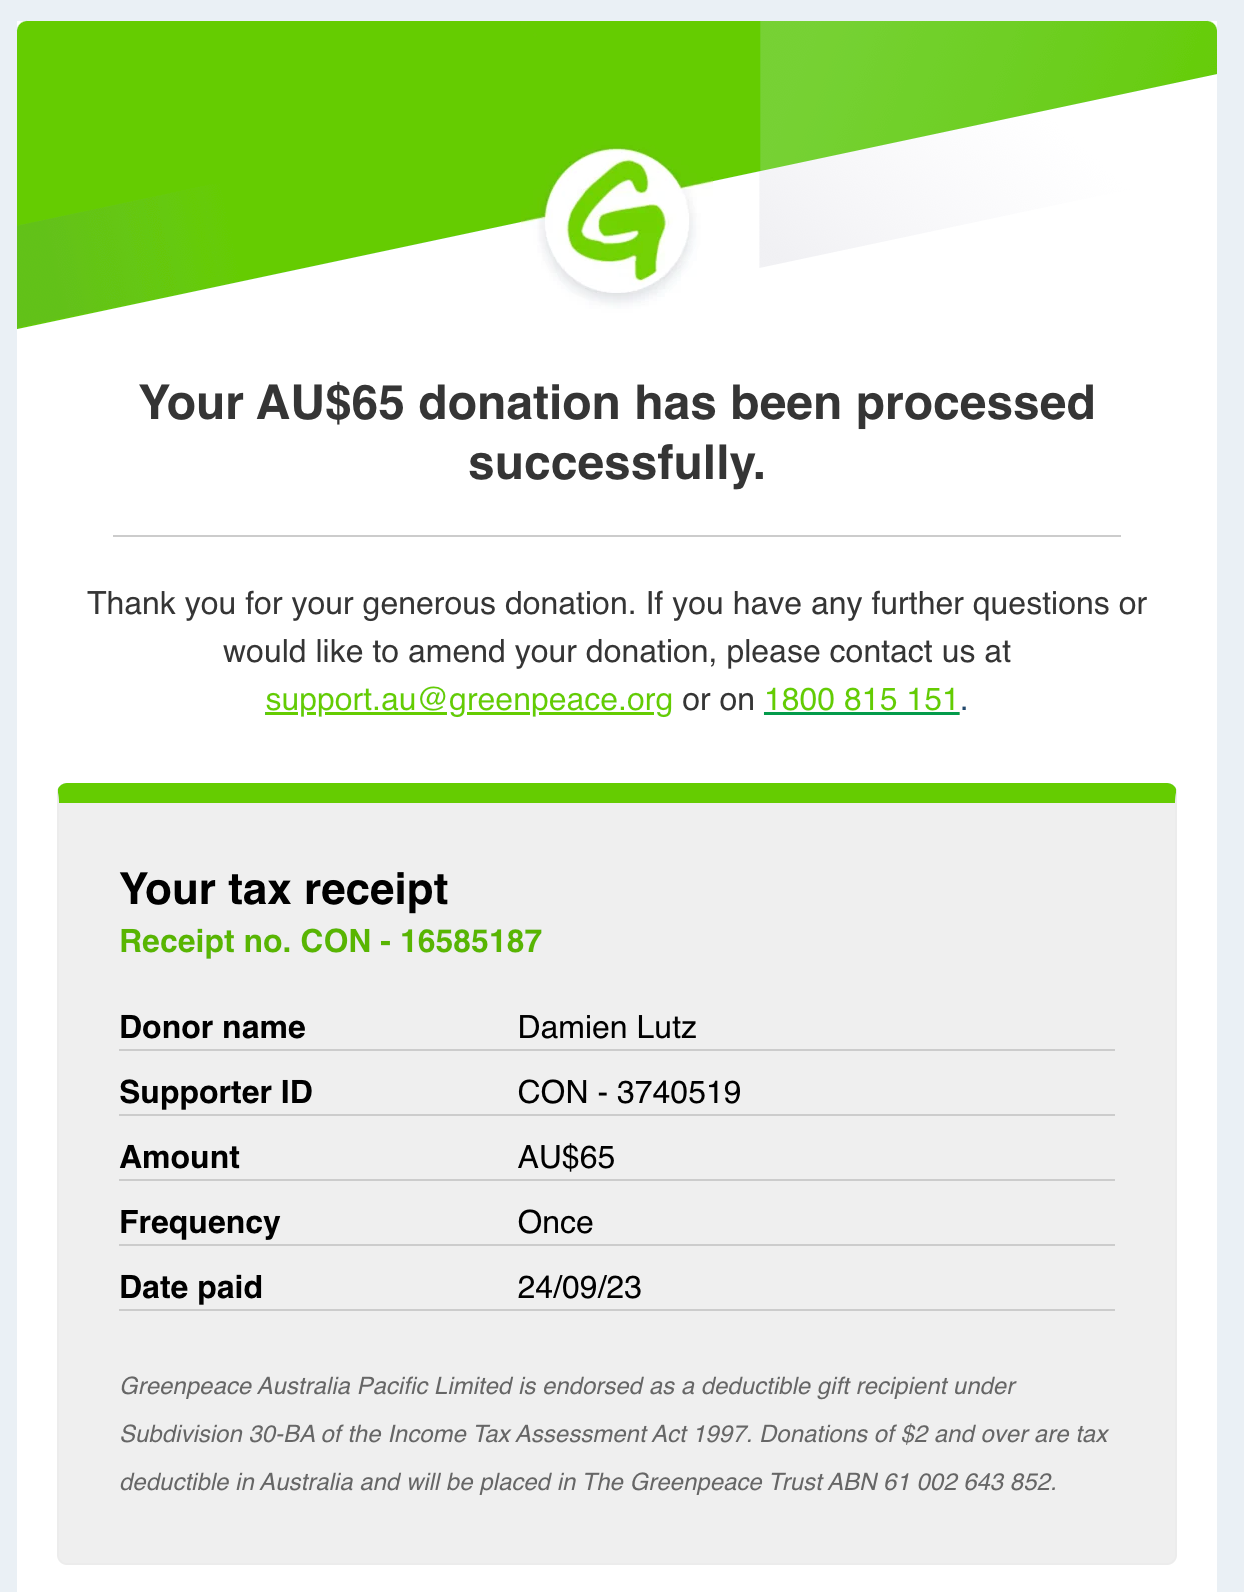 A receipt from Greenpeace for a $65 donation, supporting the fight for climate justice.